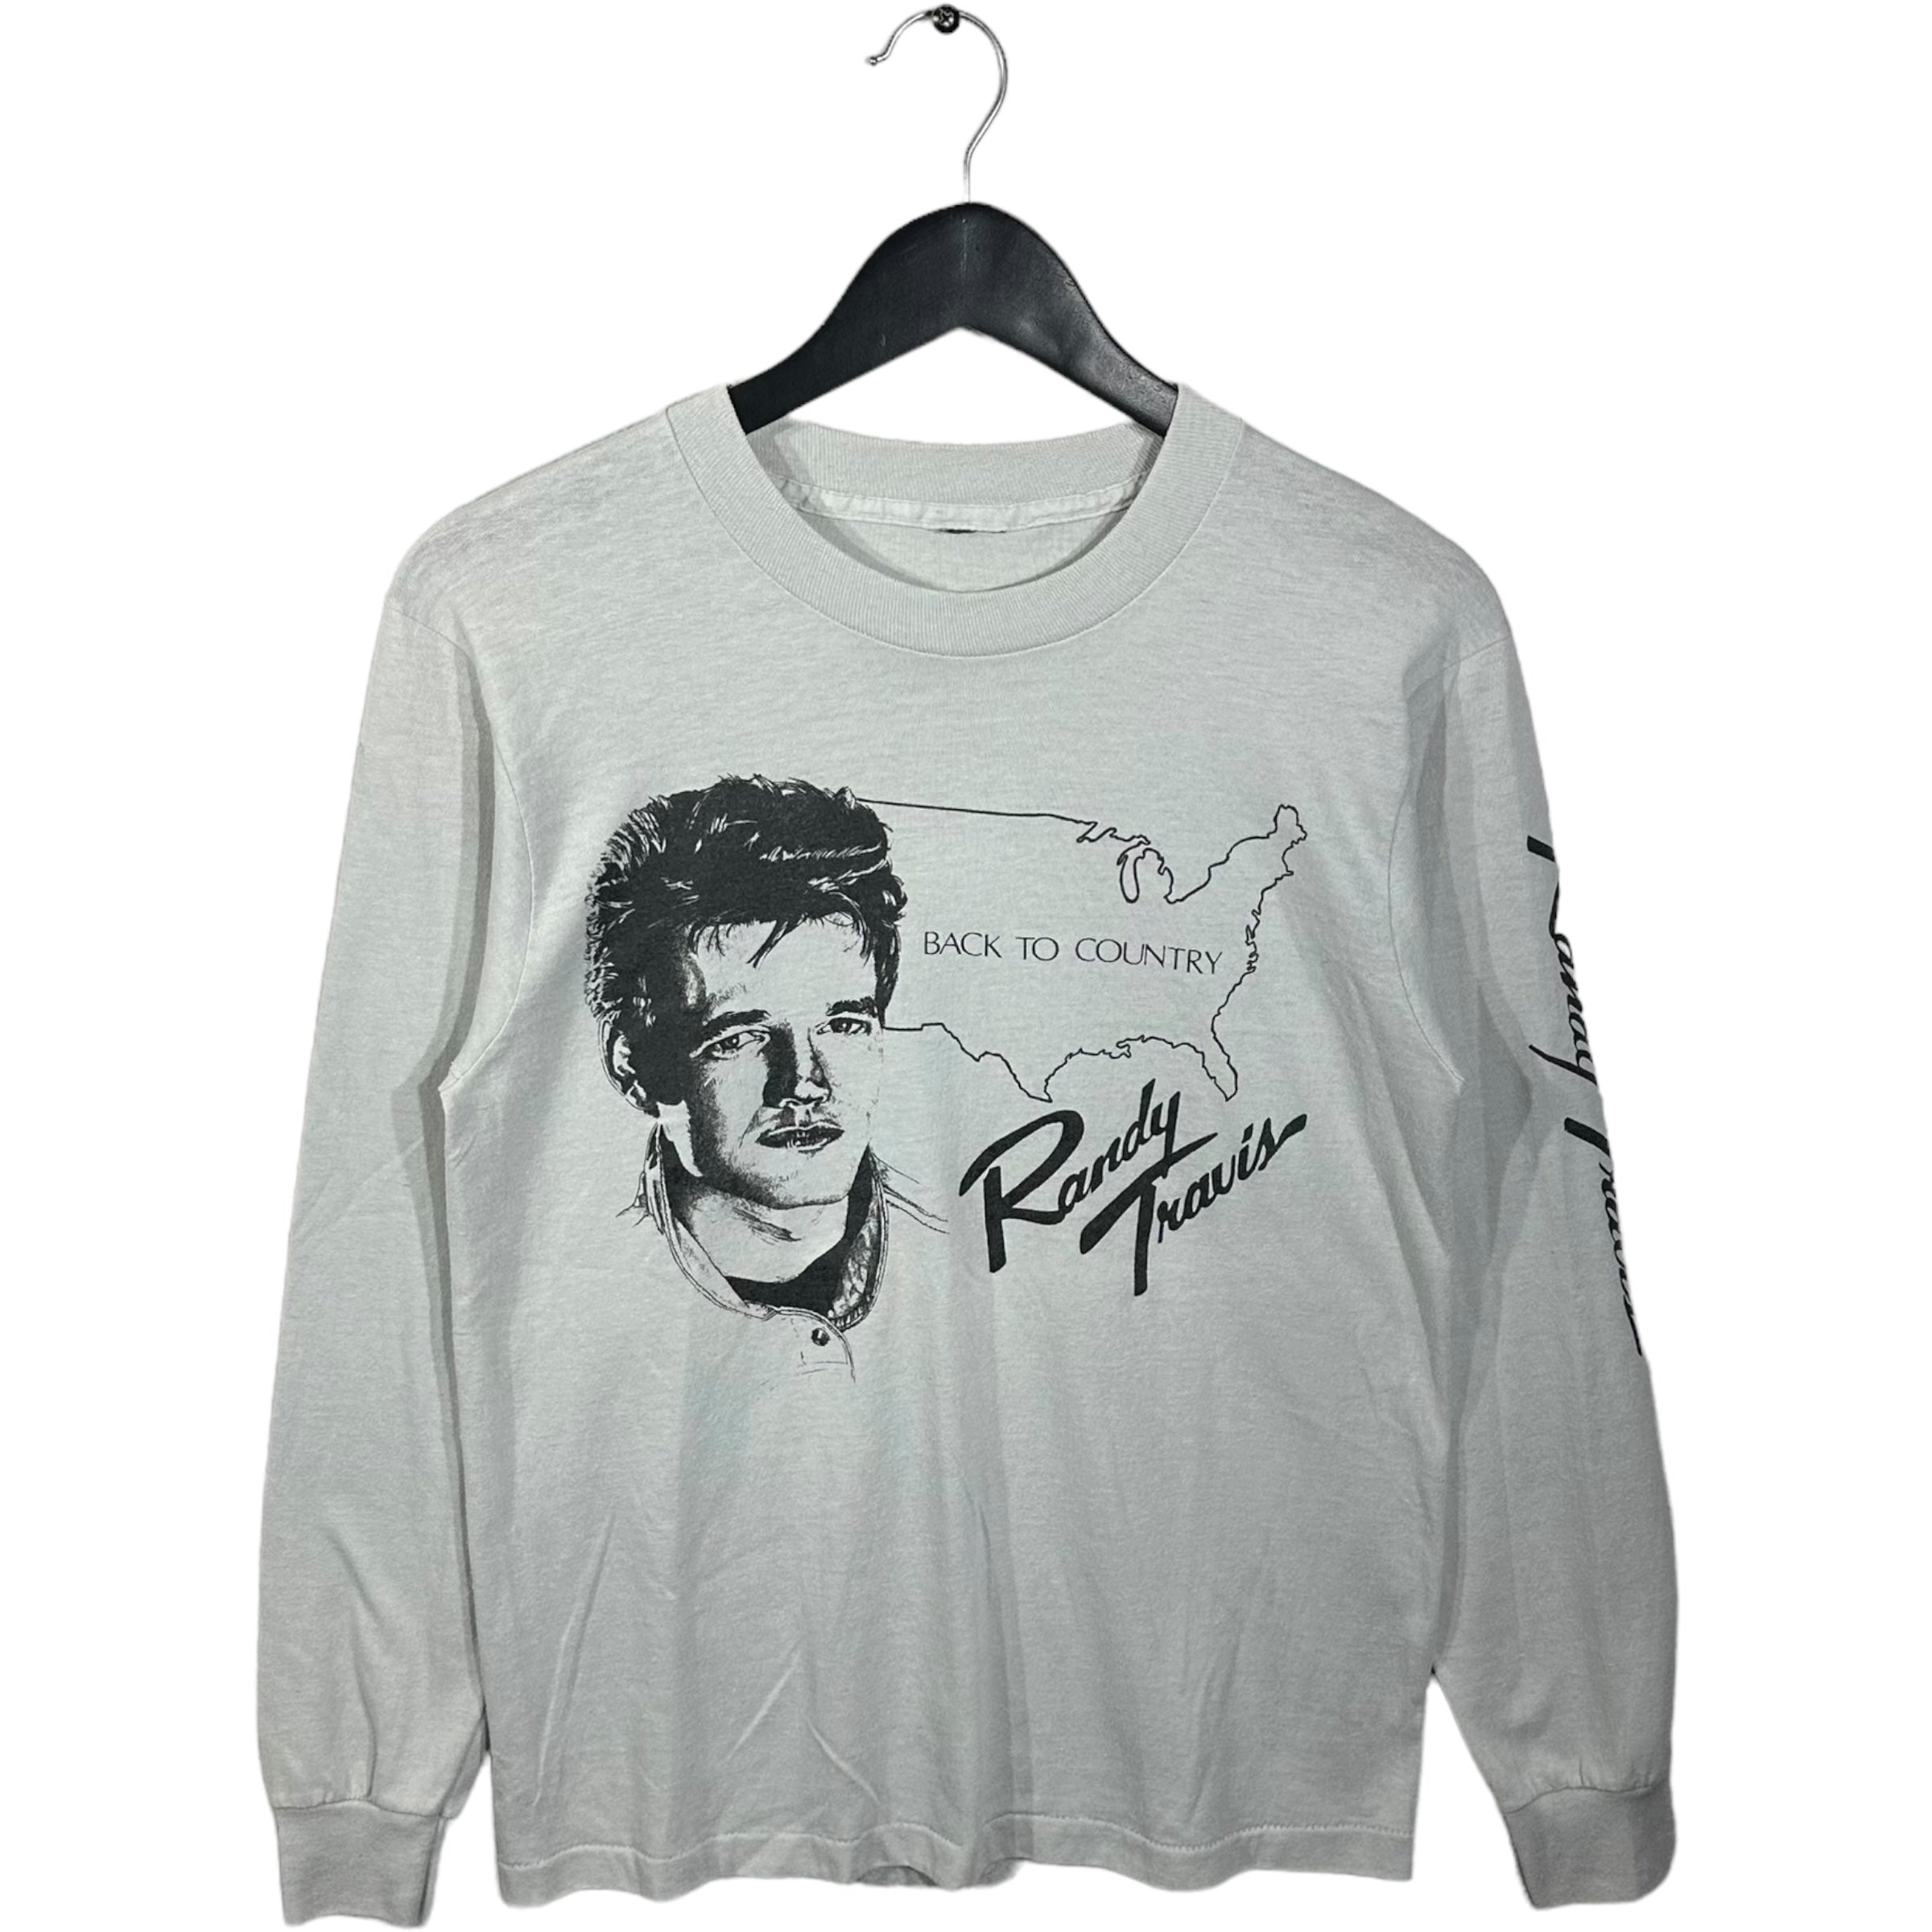 Vintage Randy Travis "Back To Country" Long Sleeve